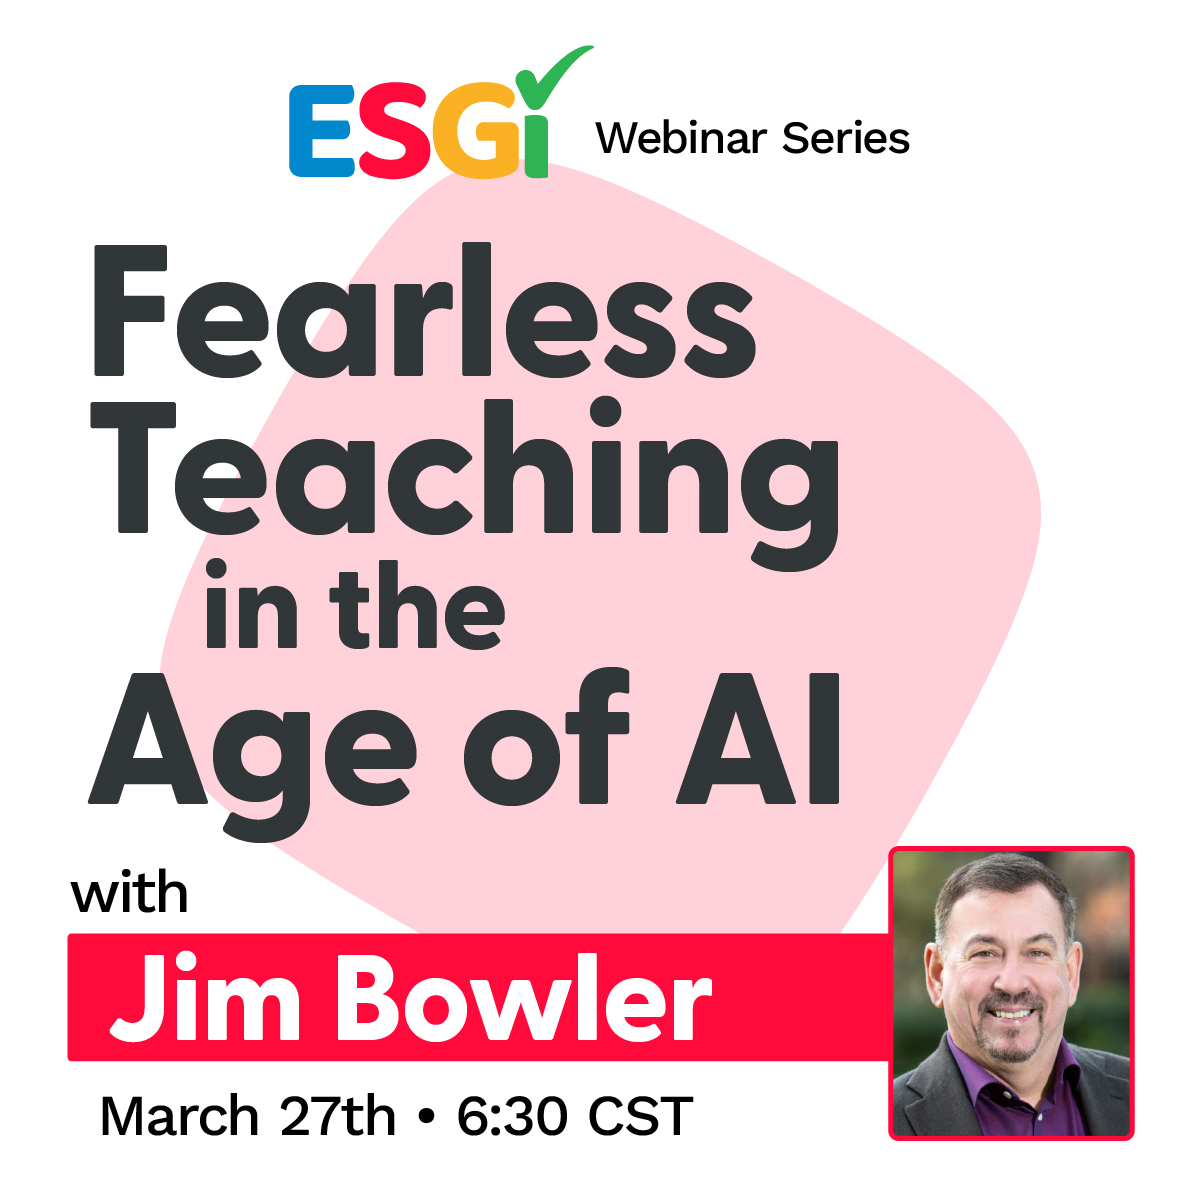 Calling all teachers & admins! Don't miss our webinar 'Fearless Teaching in the Age of AI.' Join ESGI's Jim Bowler to revolutionize your teaching with cutting-edge strategies & resources. #ESGISoftware #AIForEducation #InnovativeTeaching Register at: hubs.la/Q02qttK00